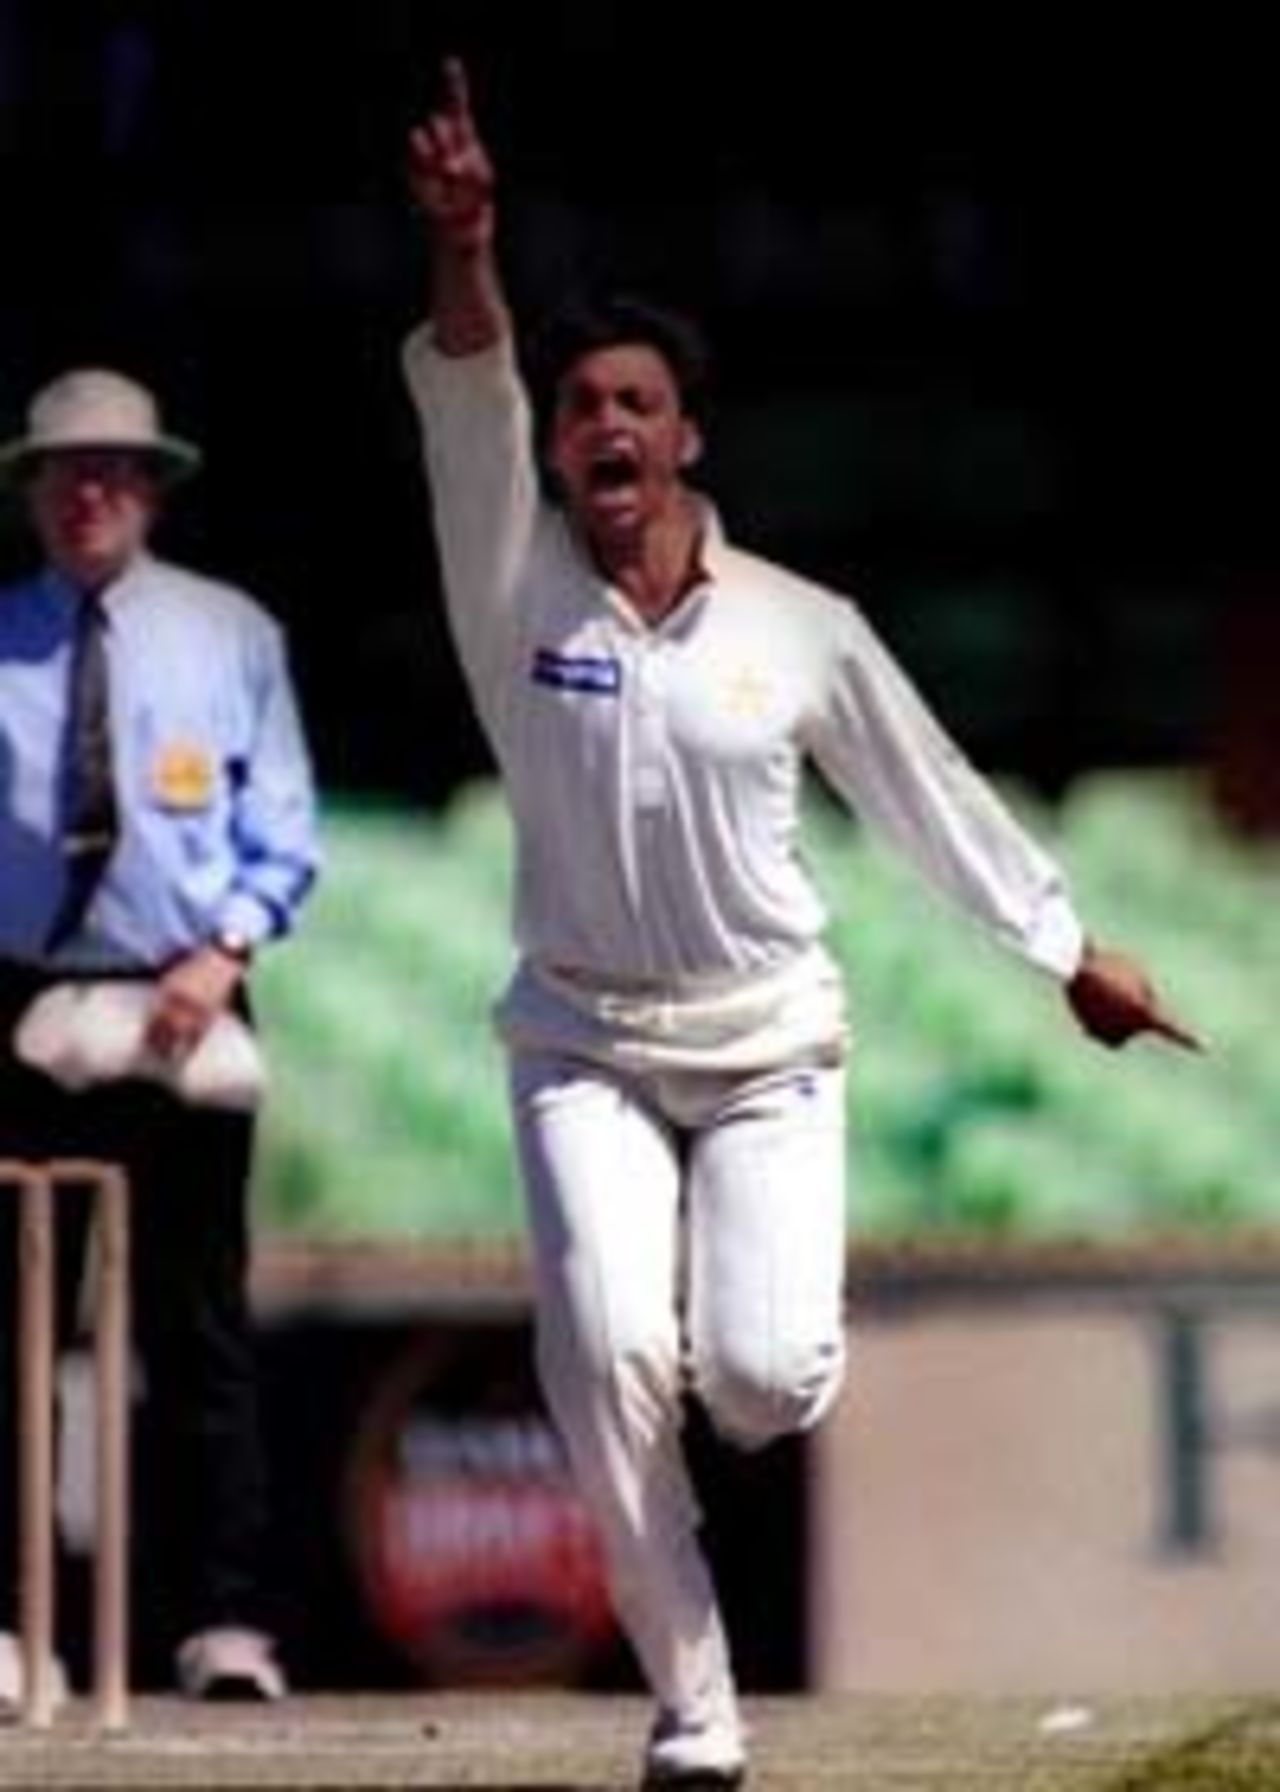 27 Oct 1999: Pakistan fast bowler Shoaib Ahktar screams after dismising opening batsman Ryan Campbell caught behind for nought during the Pakistan versus Western Australia one day cricket match played at the Western Australia Cricket Association ground in Perth, Australia today. Pakistan were defeated by Western Australia by three runs.